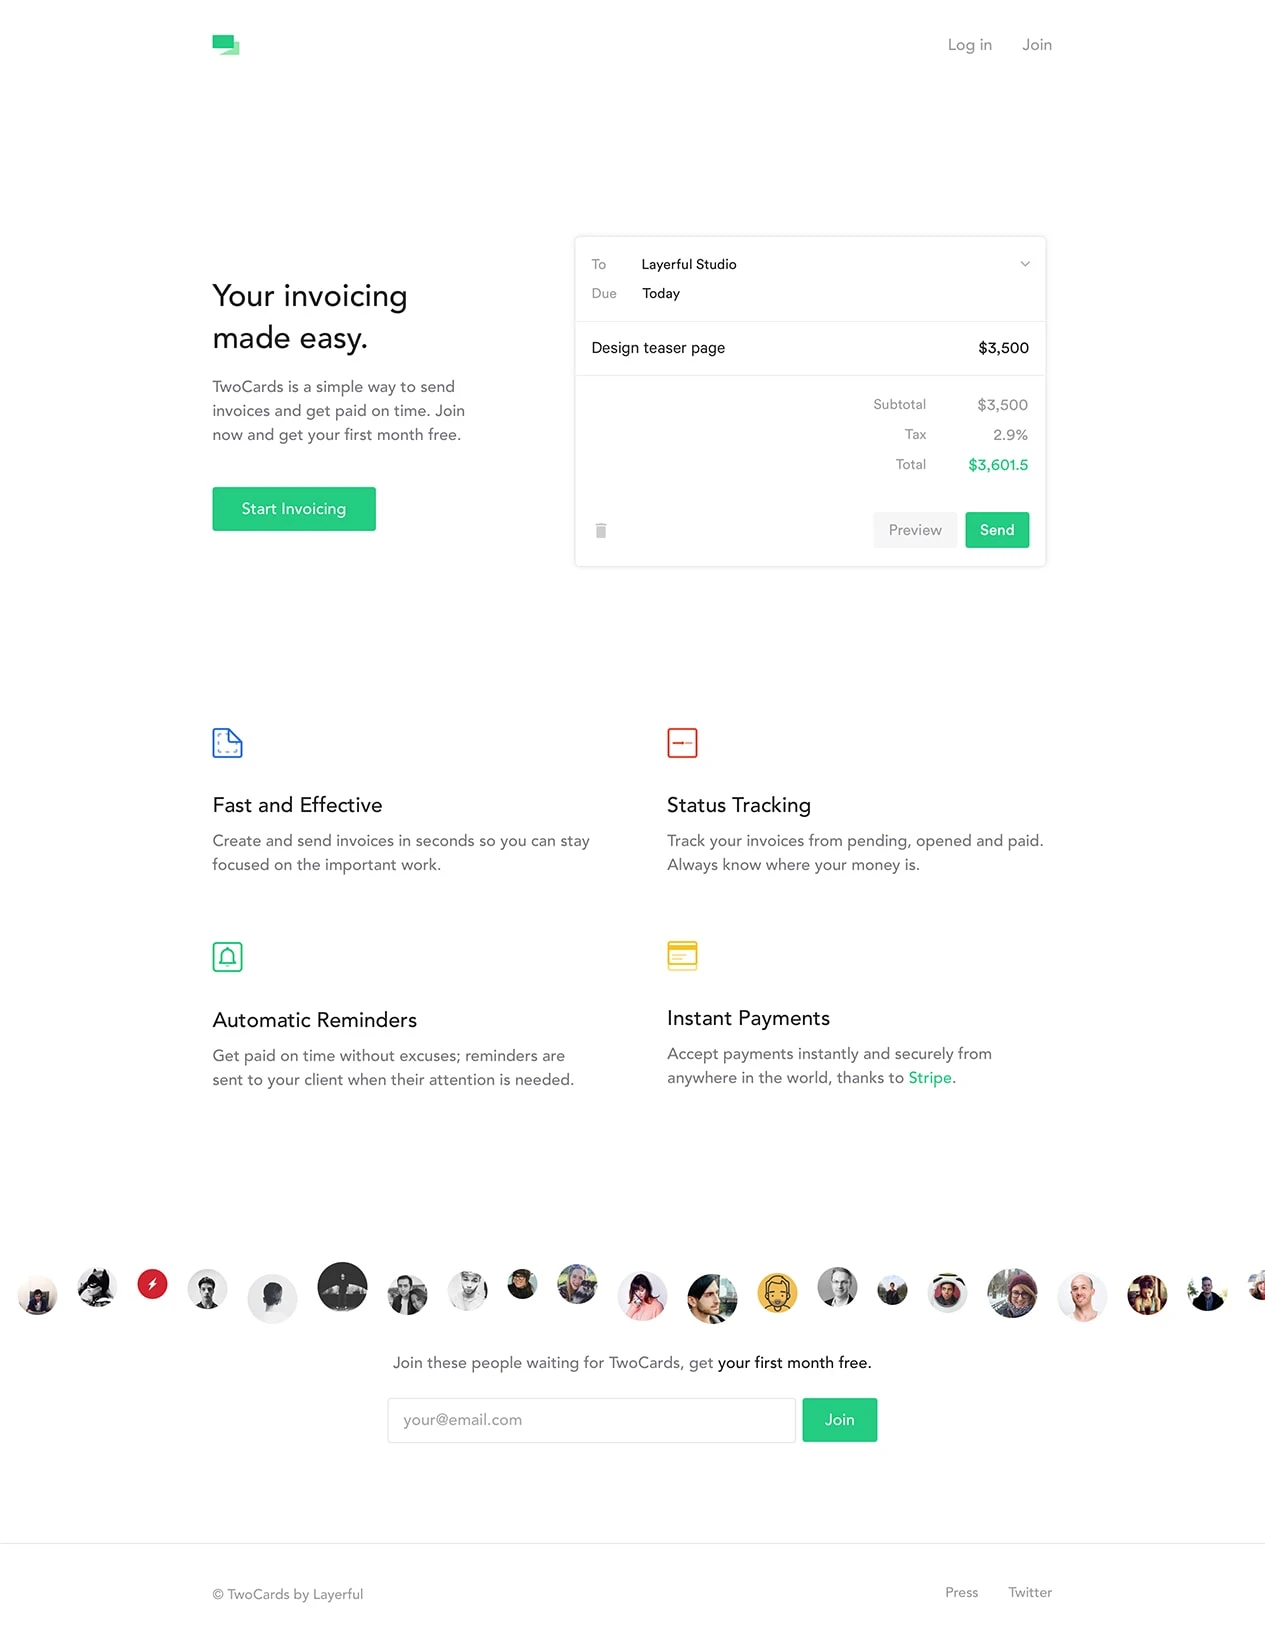 TwoCards Landing Page Example: Your invoicing made easy. TwoCards is a simple way to send invoices and get paid on time.